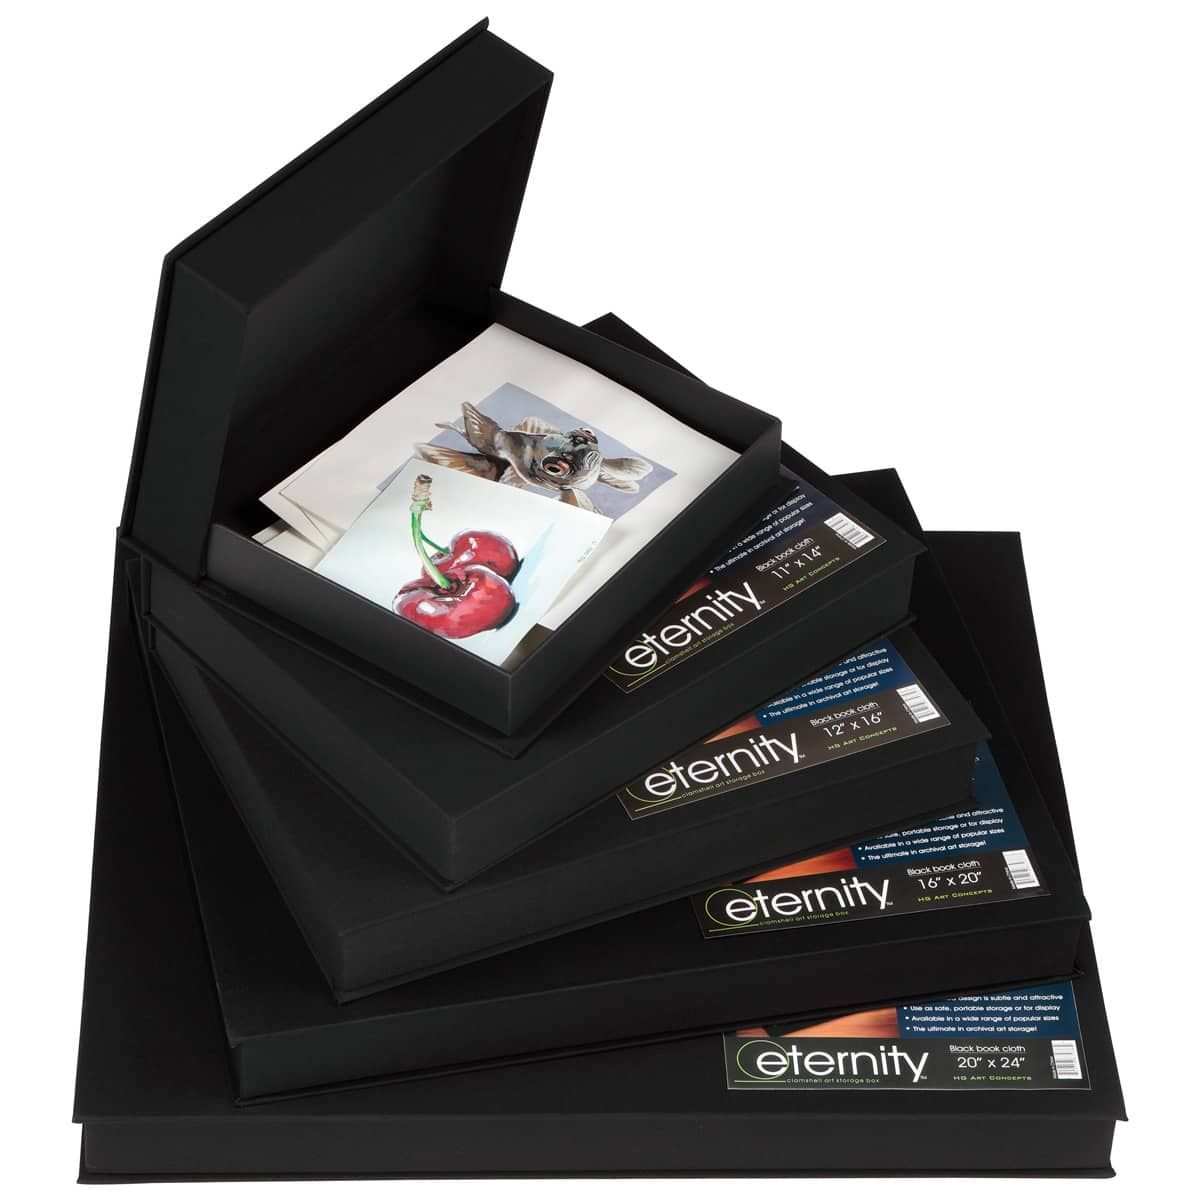 Archival Clamshell Art & Photo Storage Boxes by Eternity | Jerry's Artarama